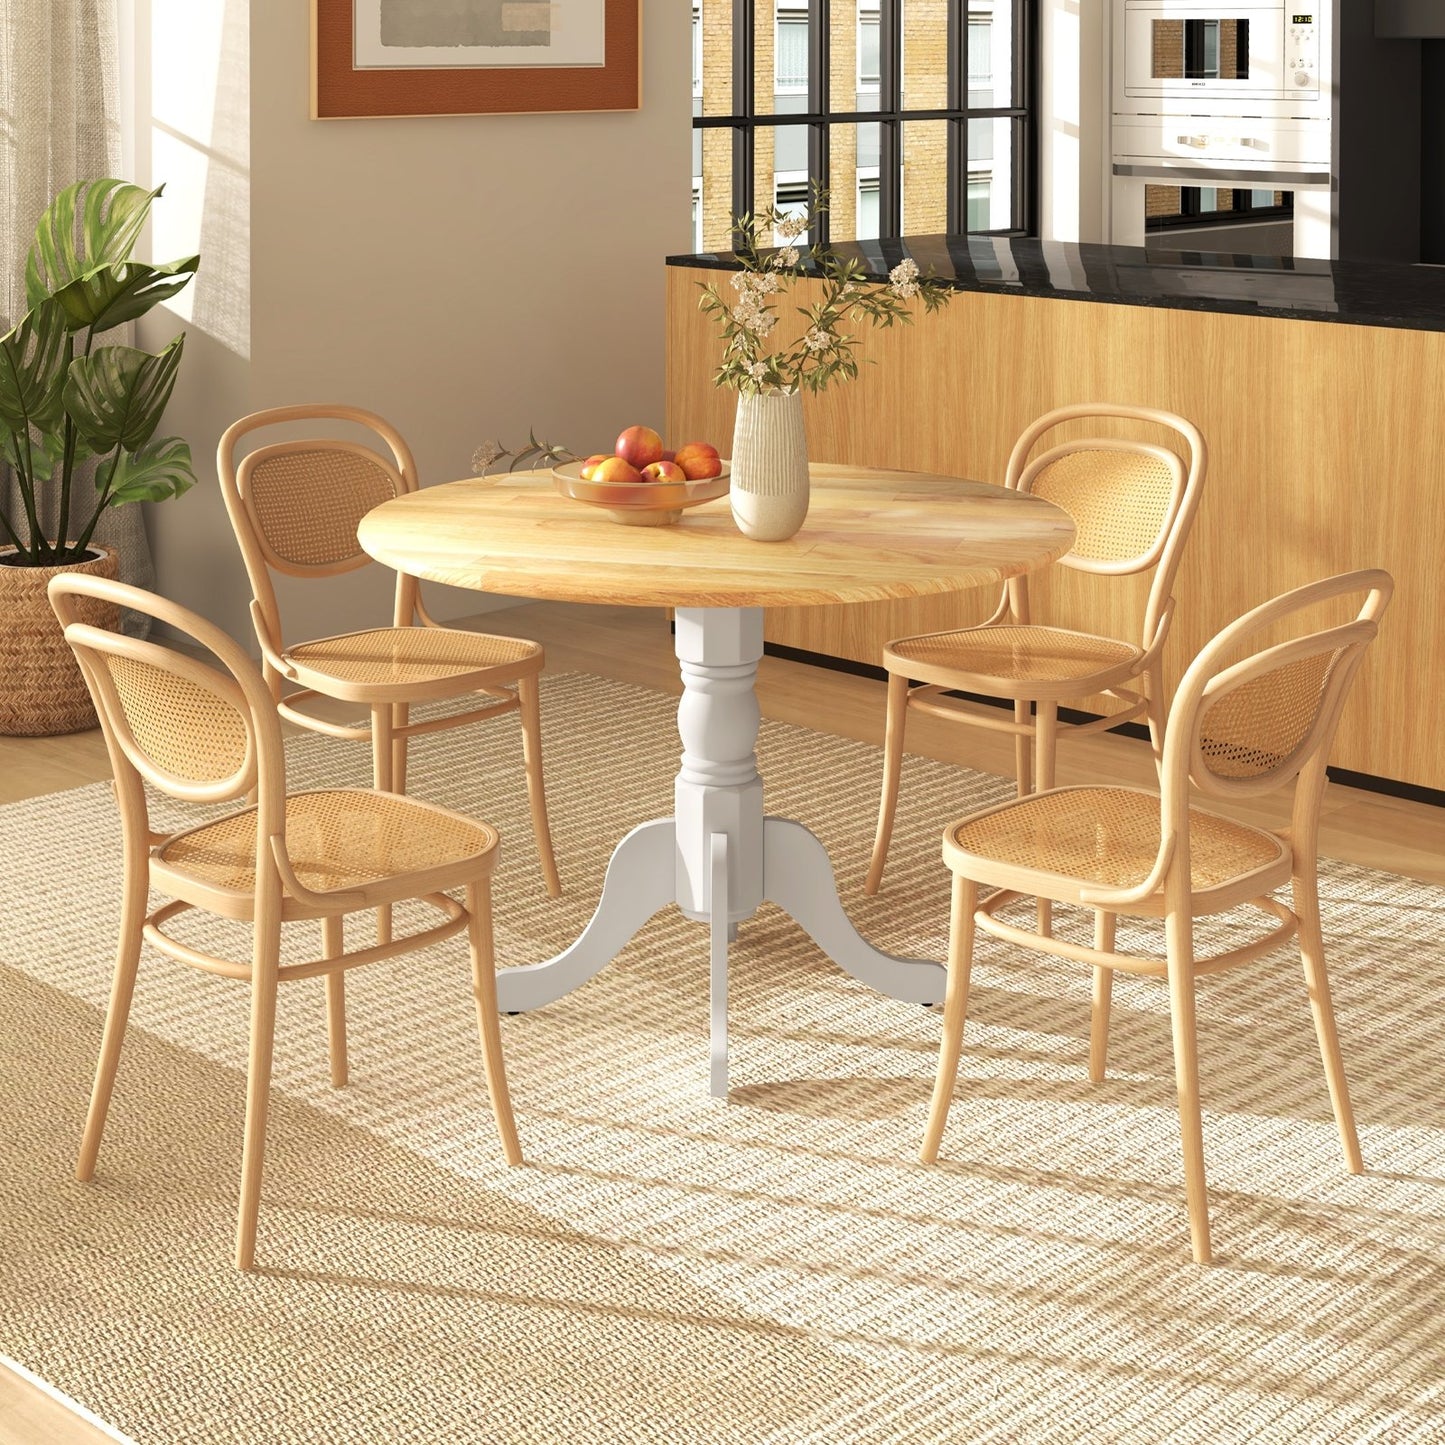 Wooden Dining Table with Round Tabletop and Curved Trestle Legs, Natural & White